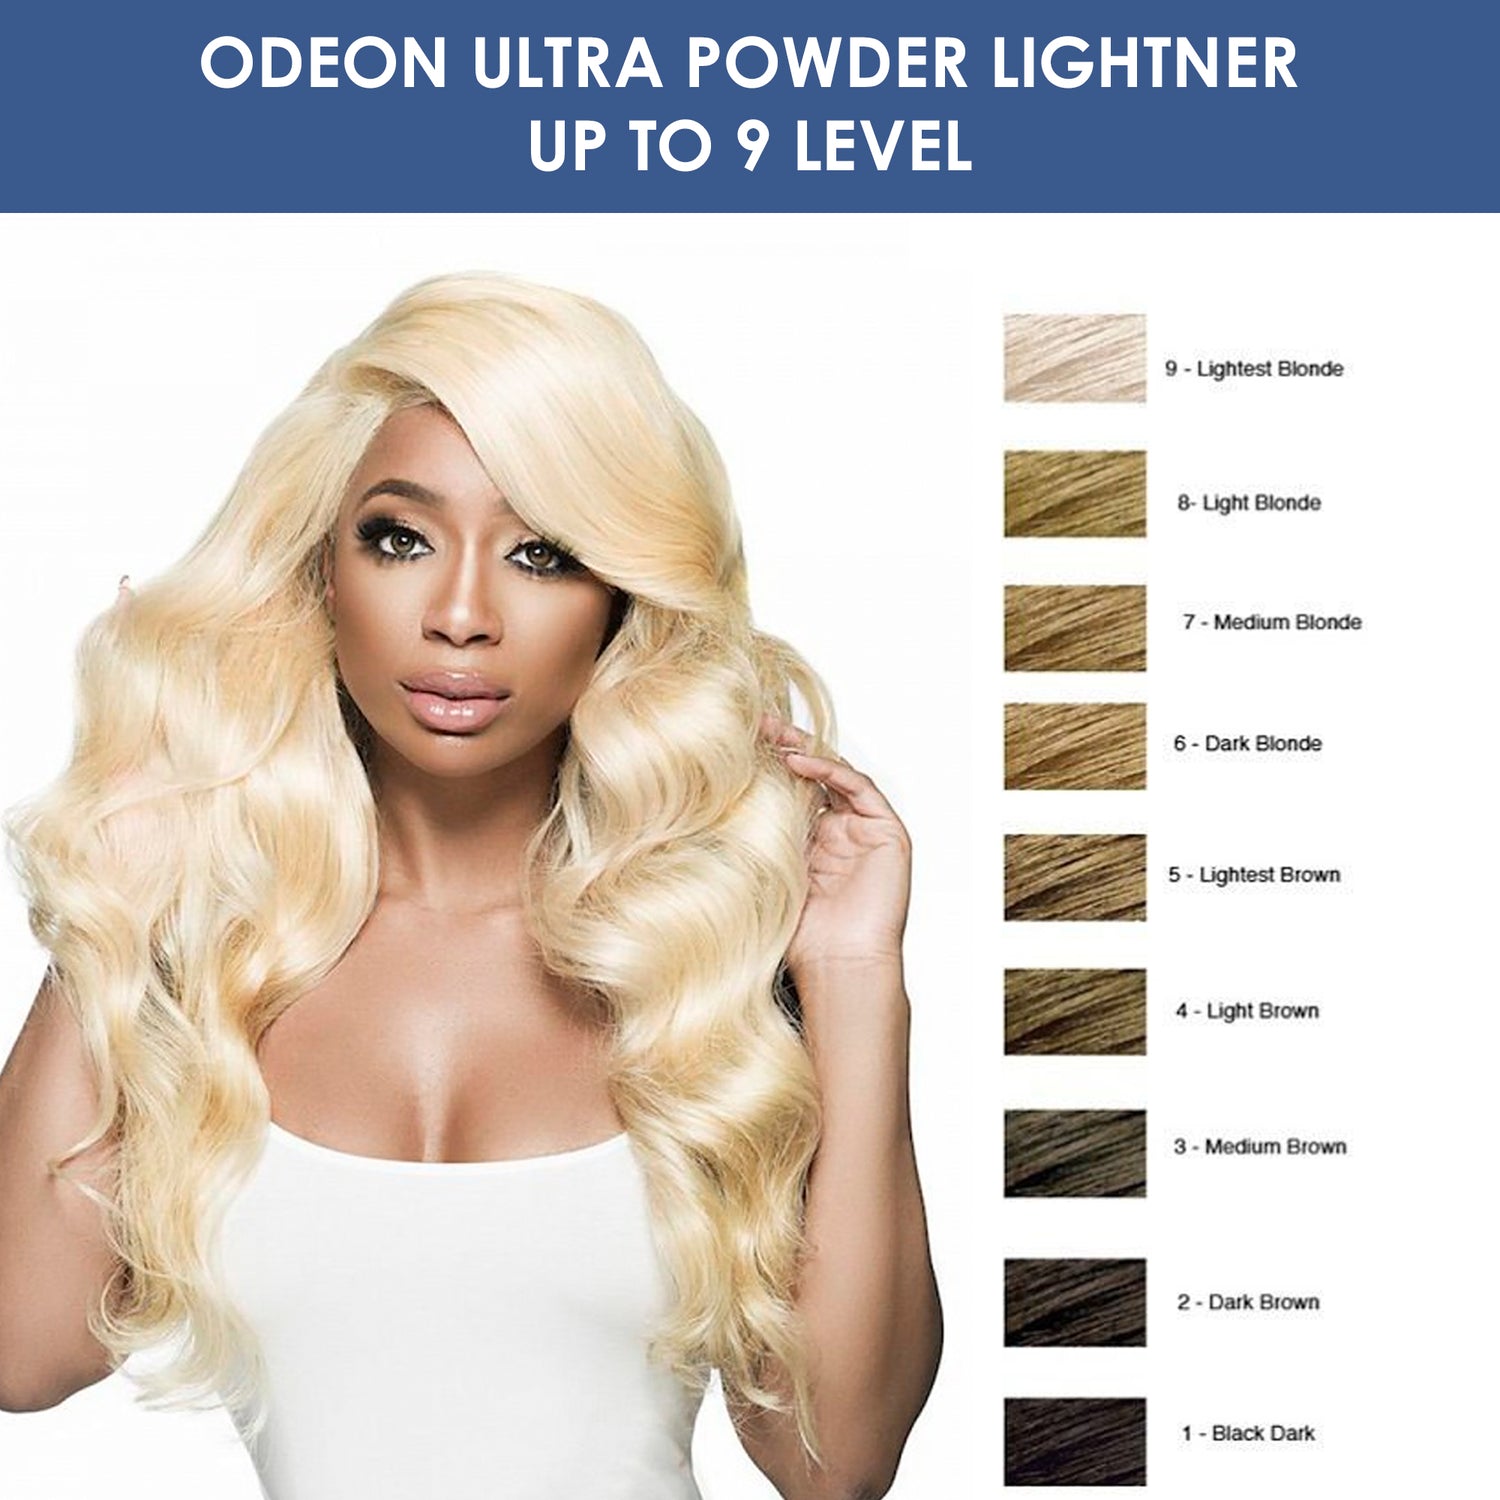 Odeon Professional Ultra-Lifting Powder Up To 9++ level With Mixing Bowl &amp; Dye Brush (16oz)